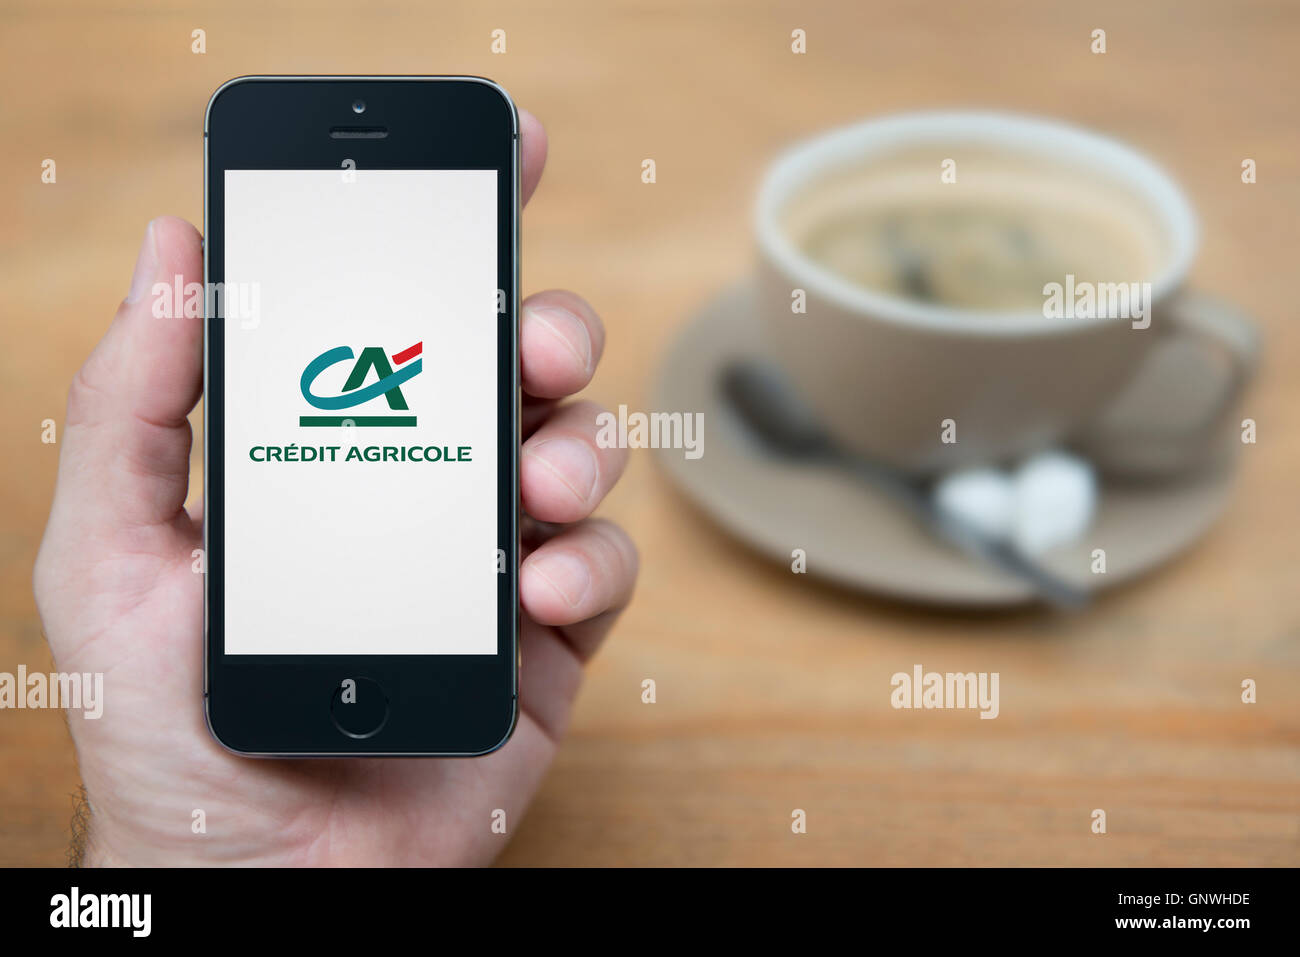 A man looks at his iPhone which displays the Credit Agricole bank logo, while sat with a cup of coffee (Editorial use only). Stock Photo